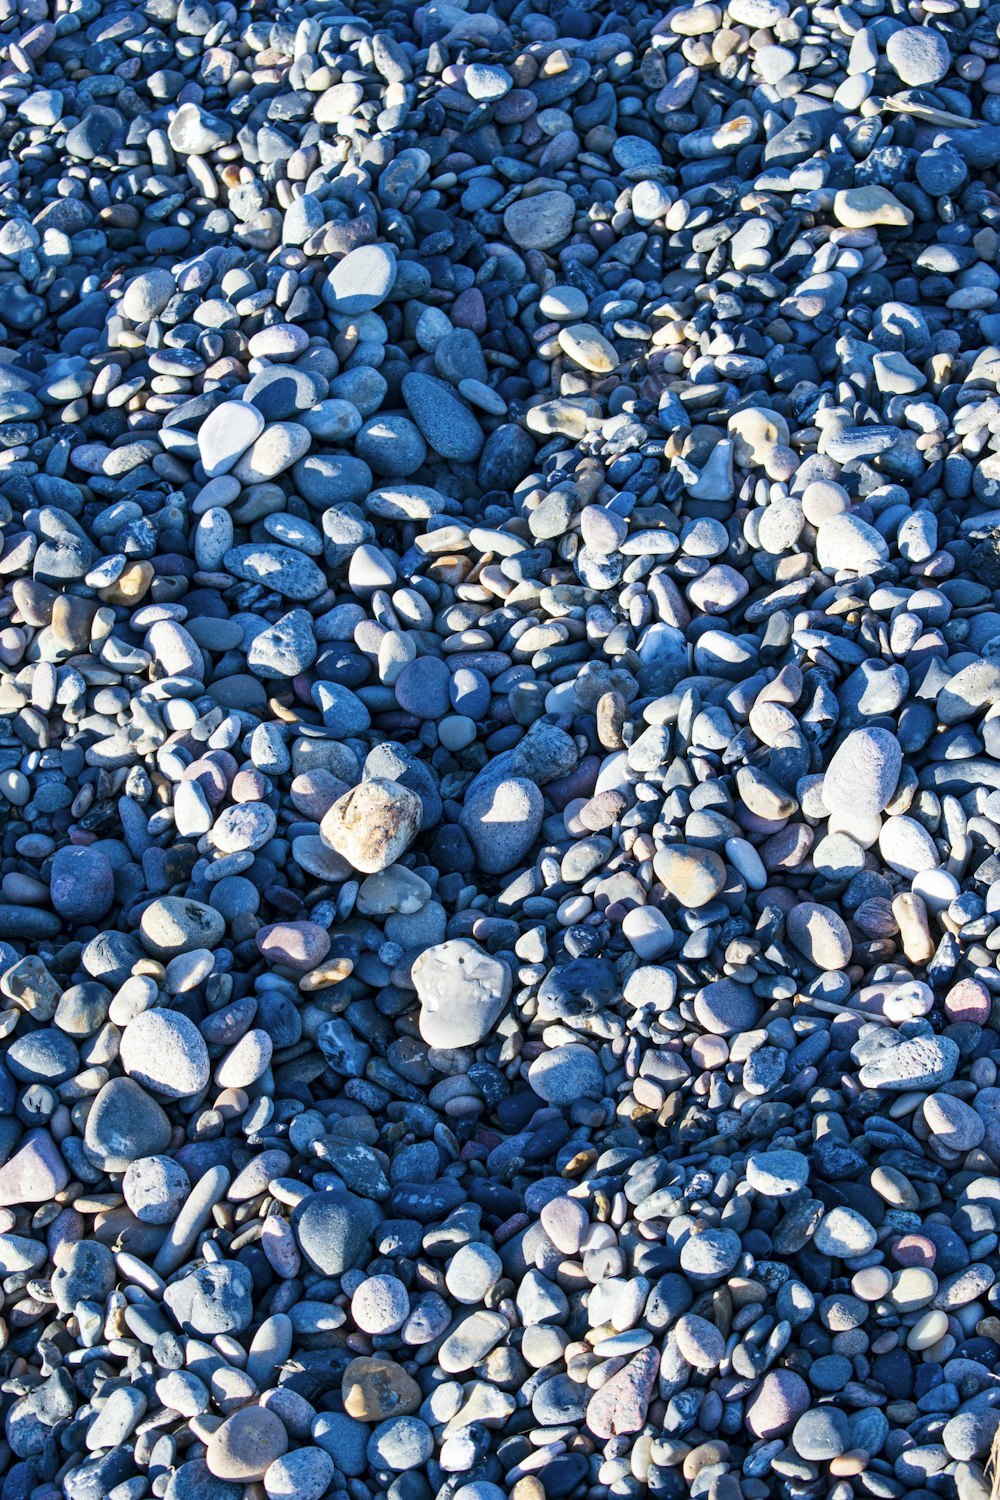 white and gray stones on blue and white pebbles